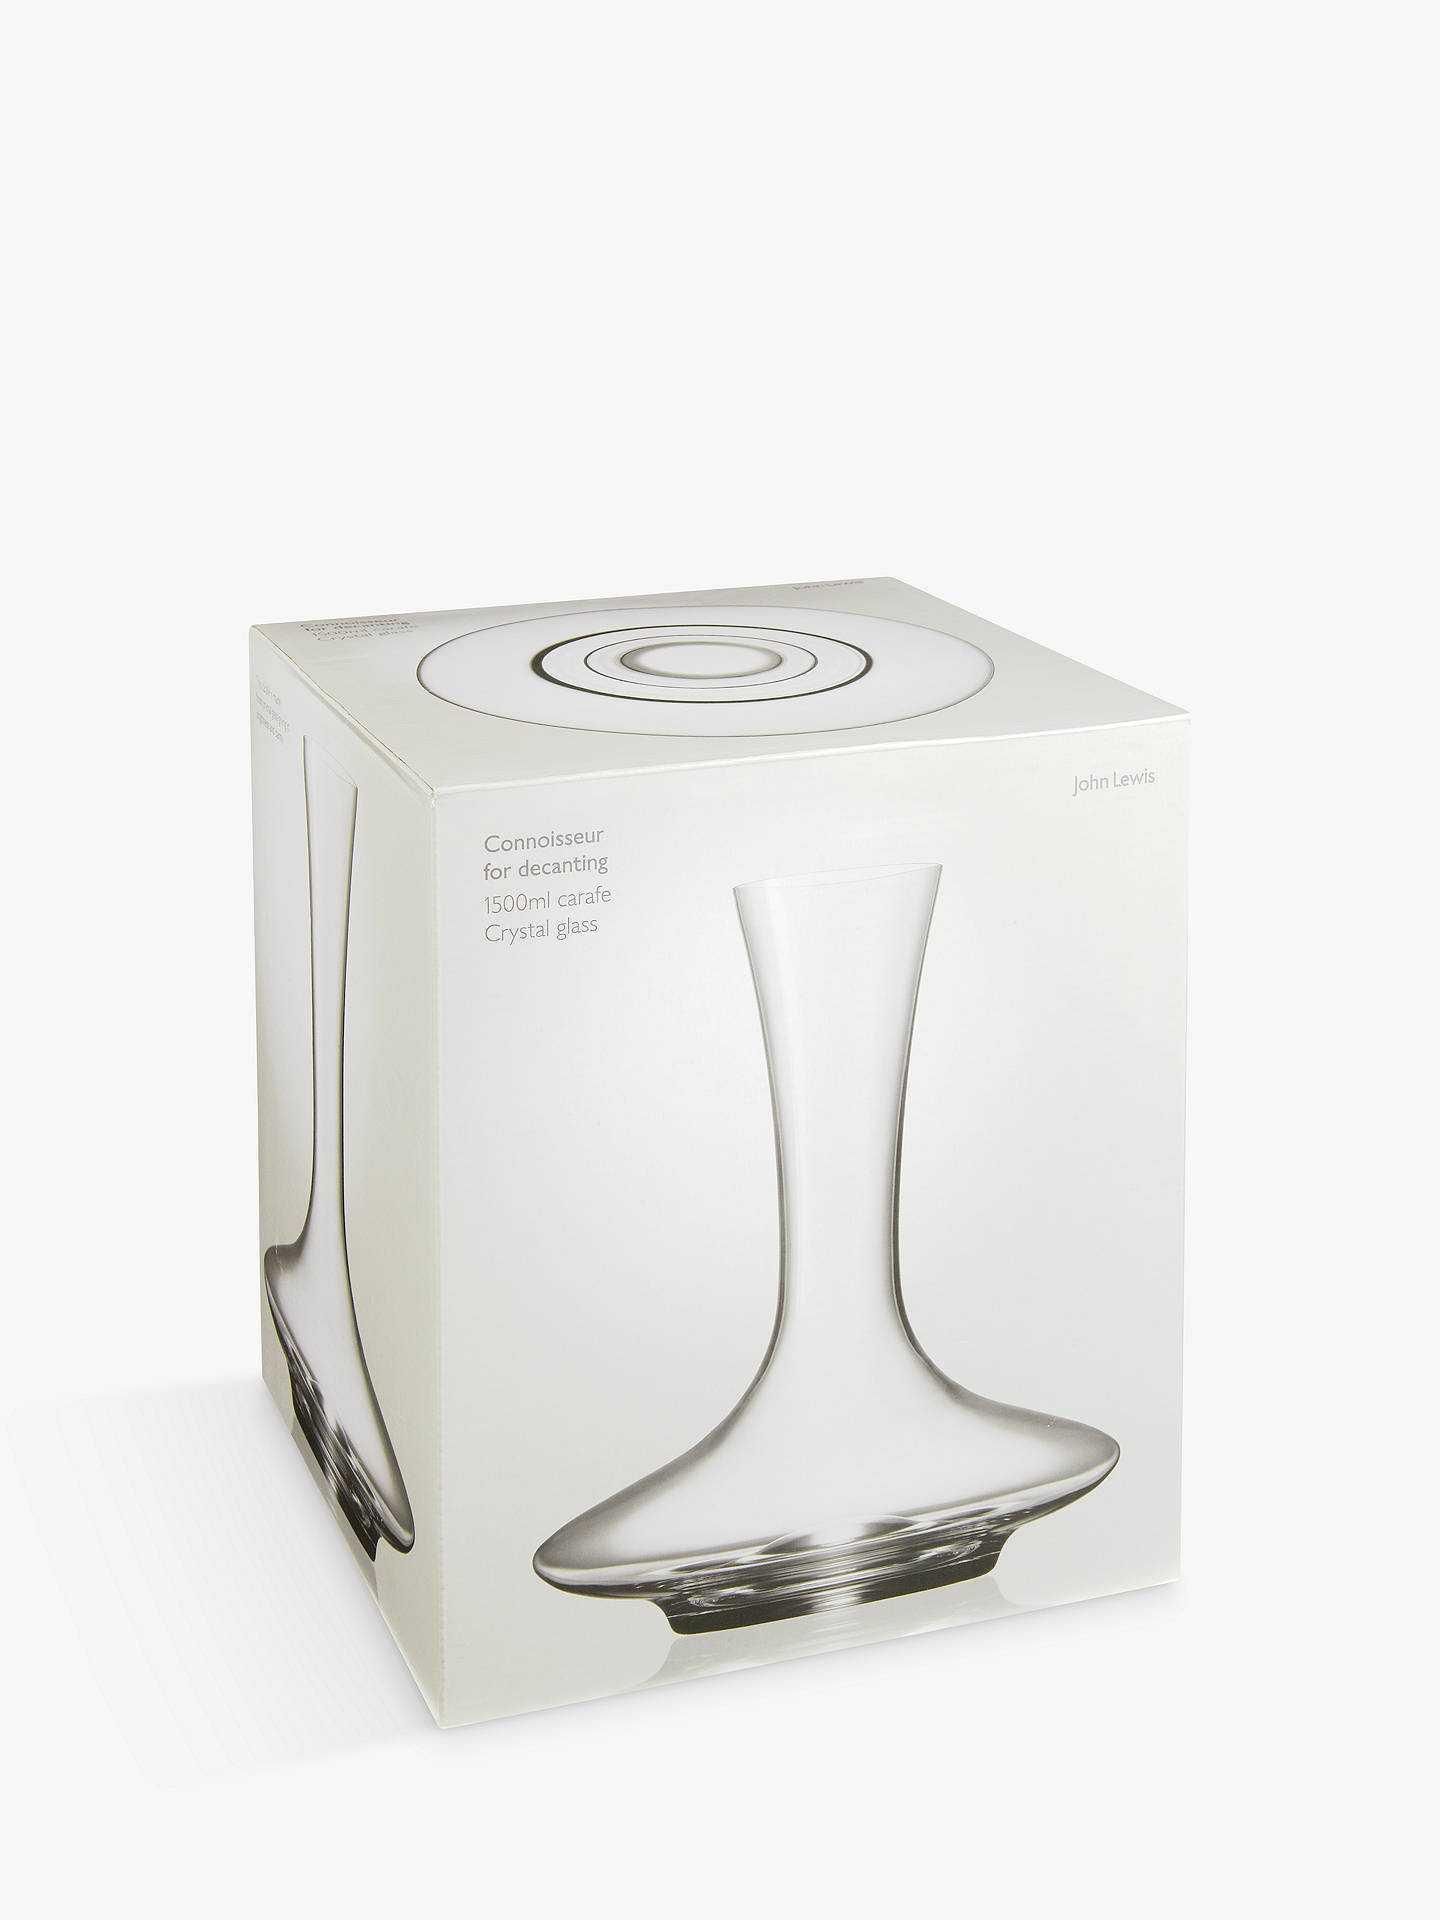 RRP £40 Boxed John Lewis 1500Ml Connoisseur For Decanting